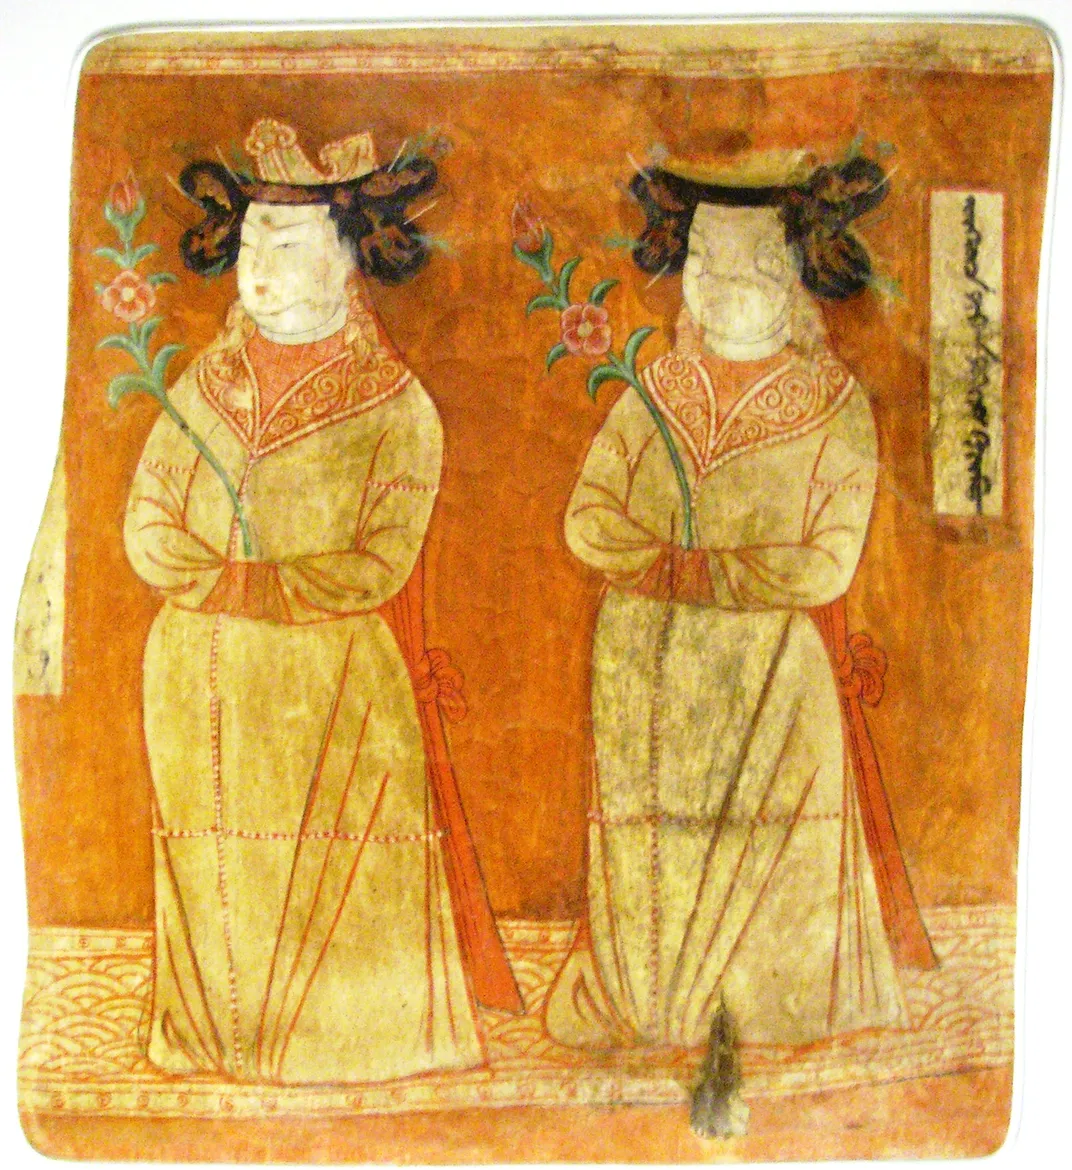 Ninth- or tenth-century C.E. wall painting depicting Uyghur princesses